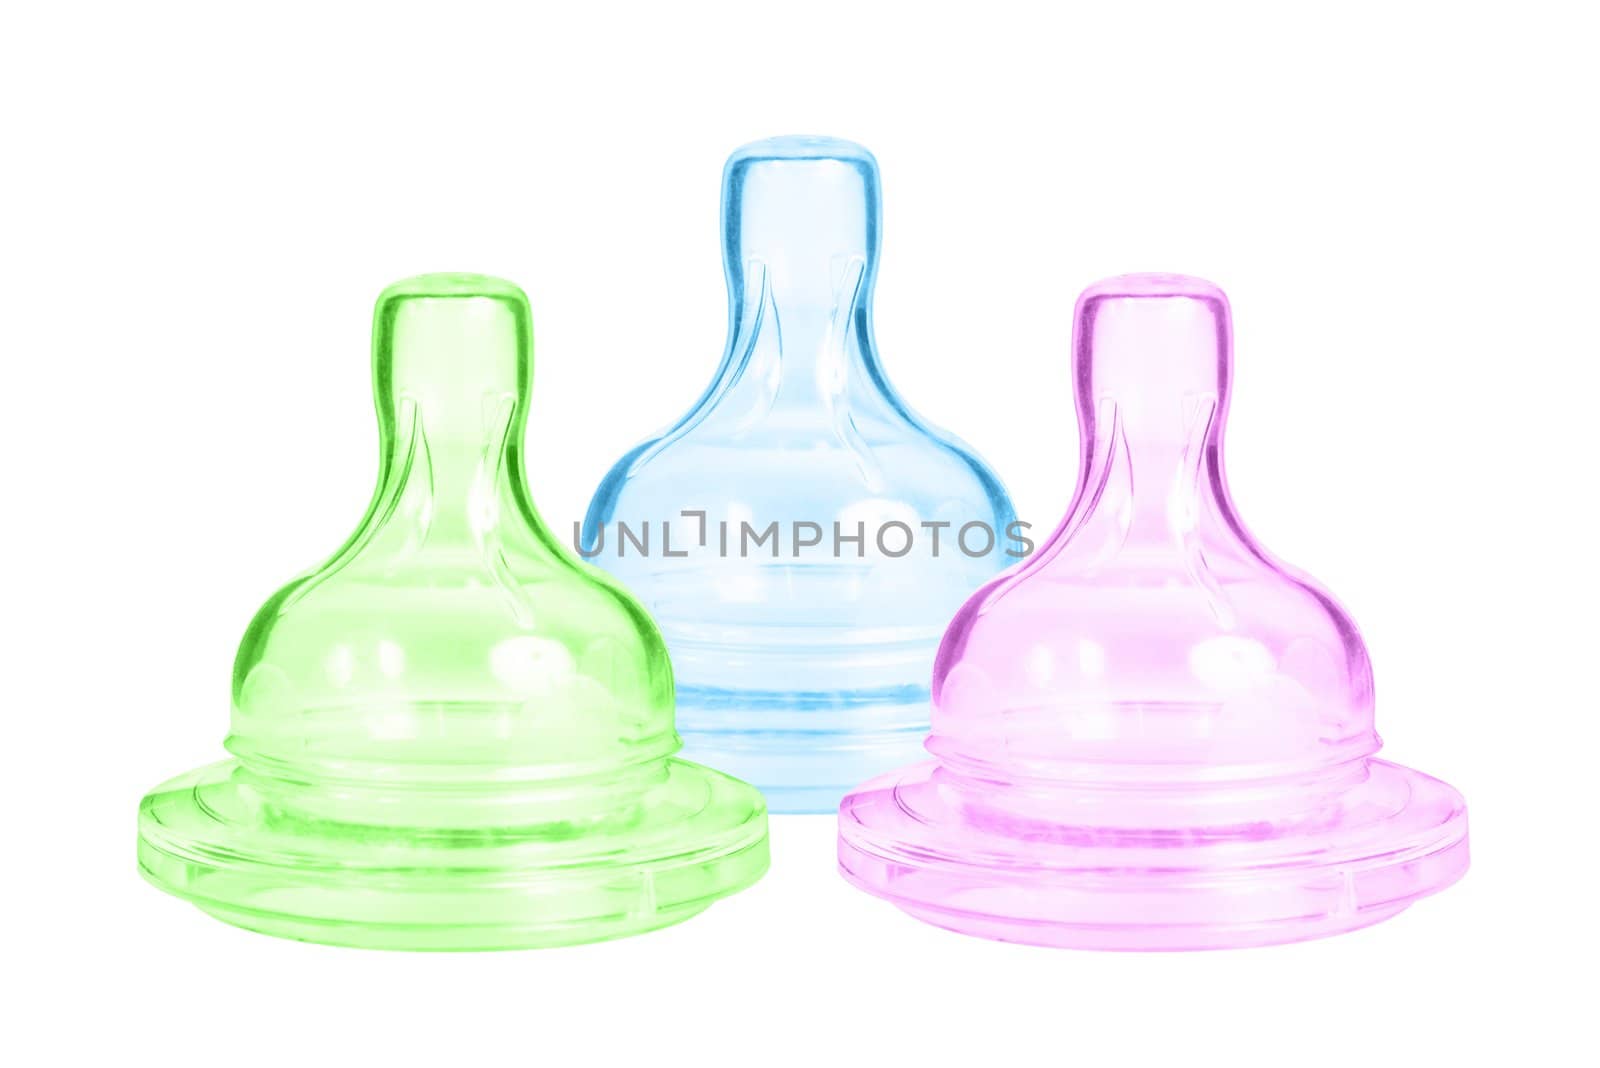 Three baby bottle pacifier. Blue, pink and green. Isolated